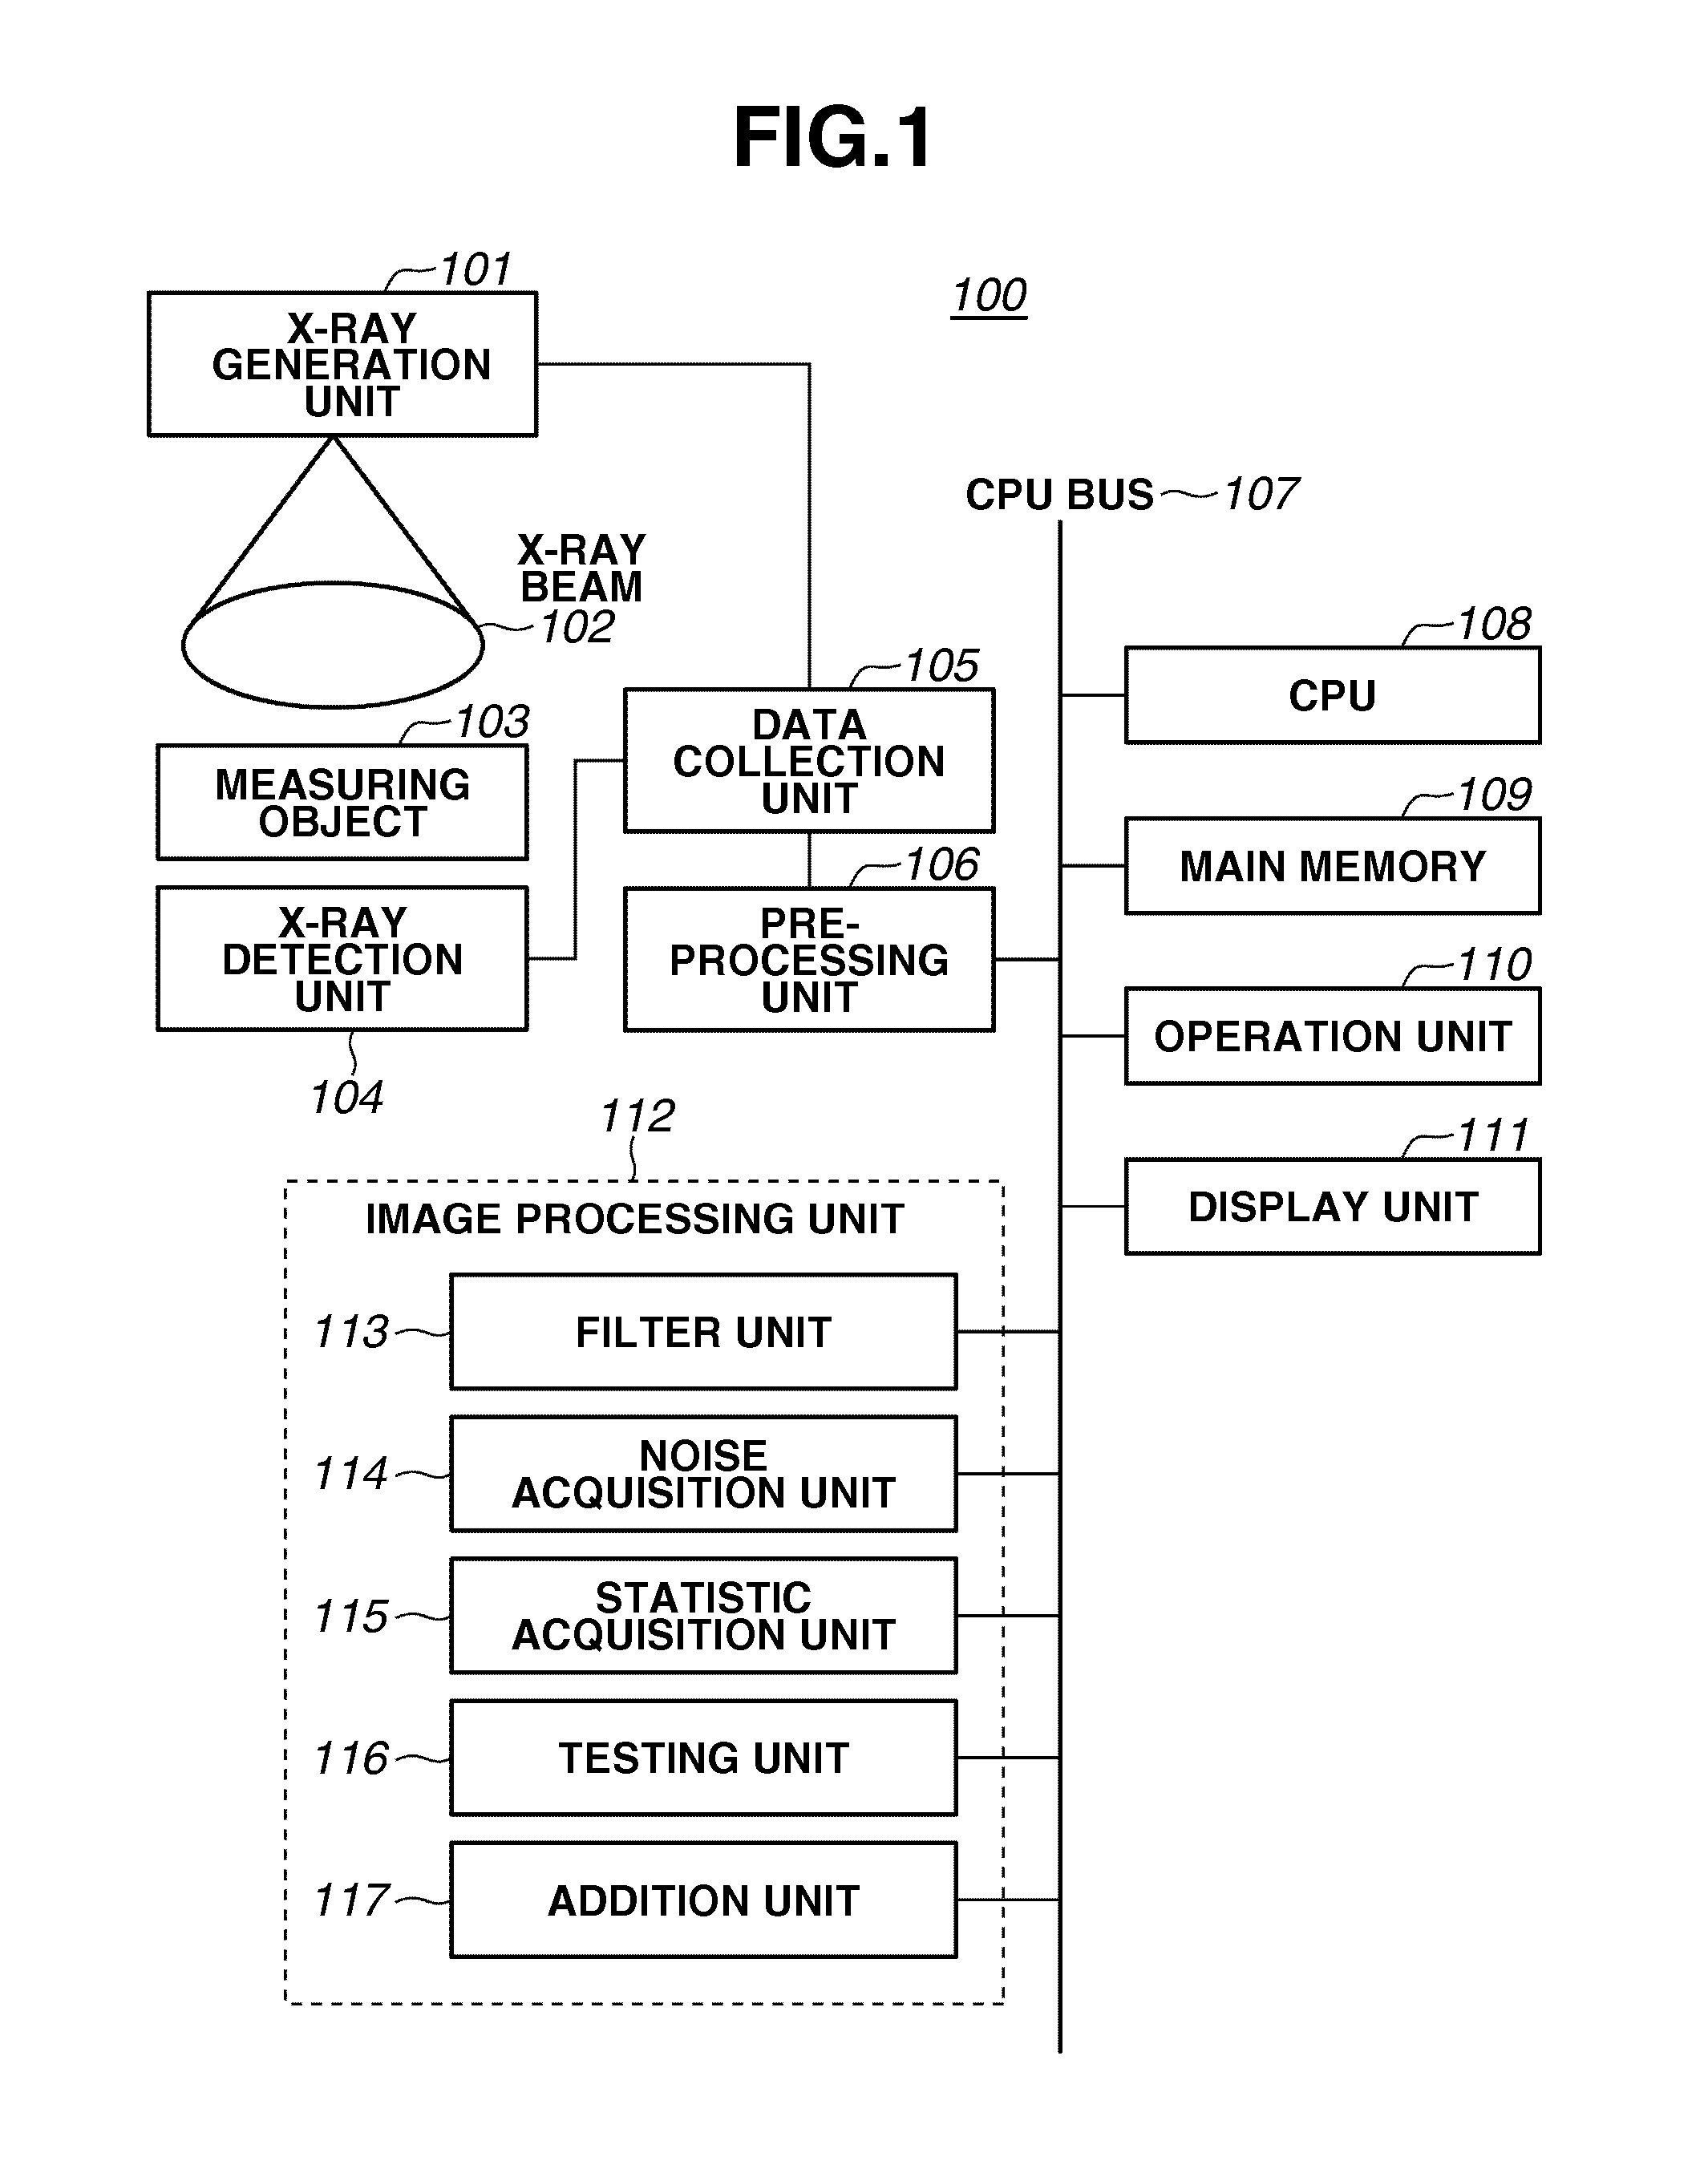 Image processing apparatus, image processing method, and computer recording medium for reducing an amount of noise included in an image